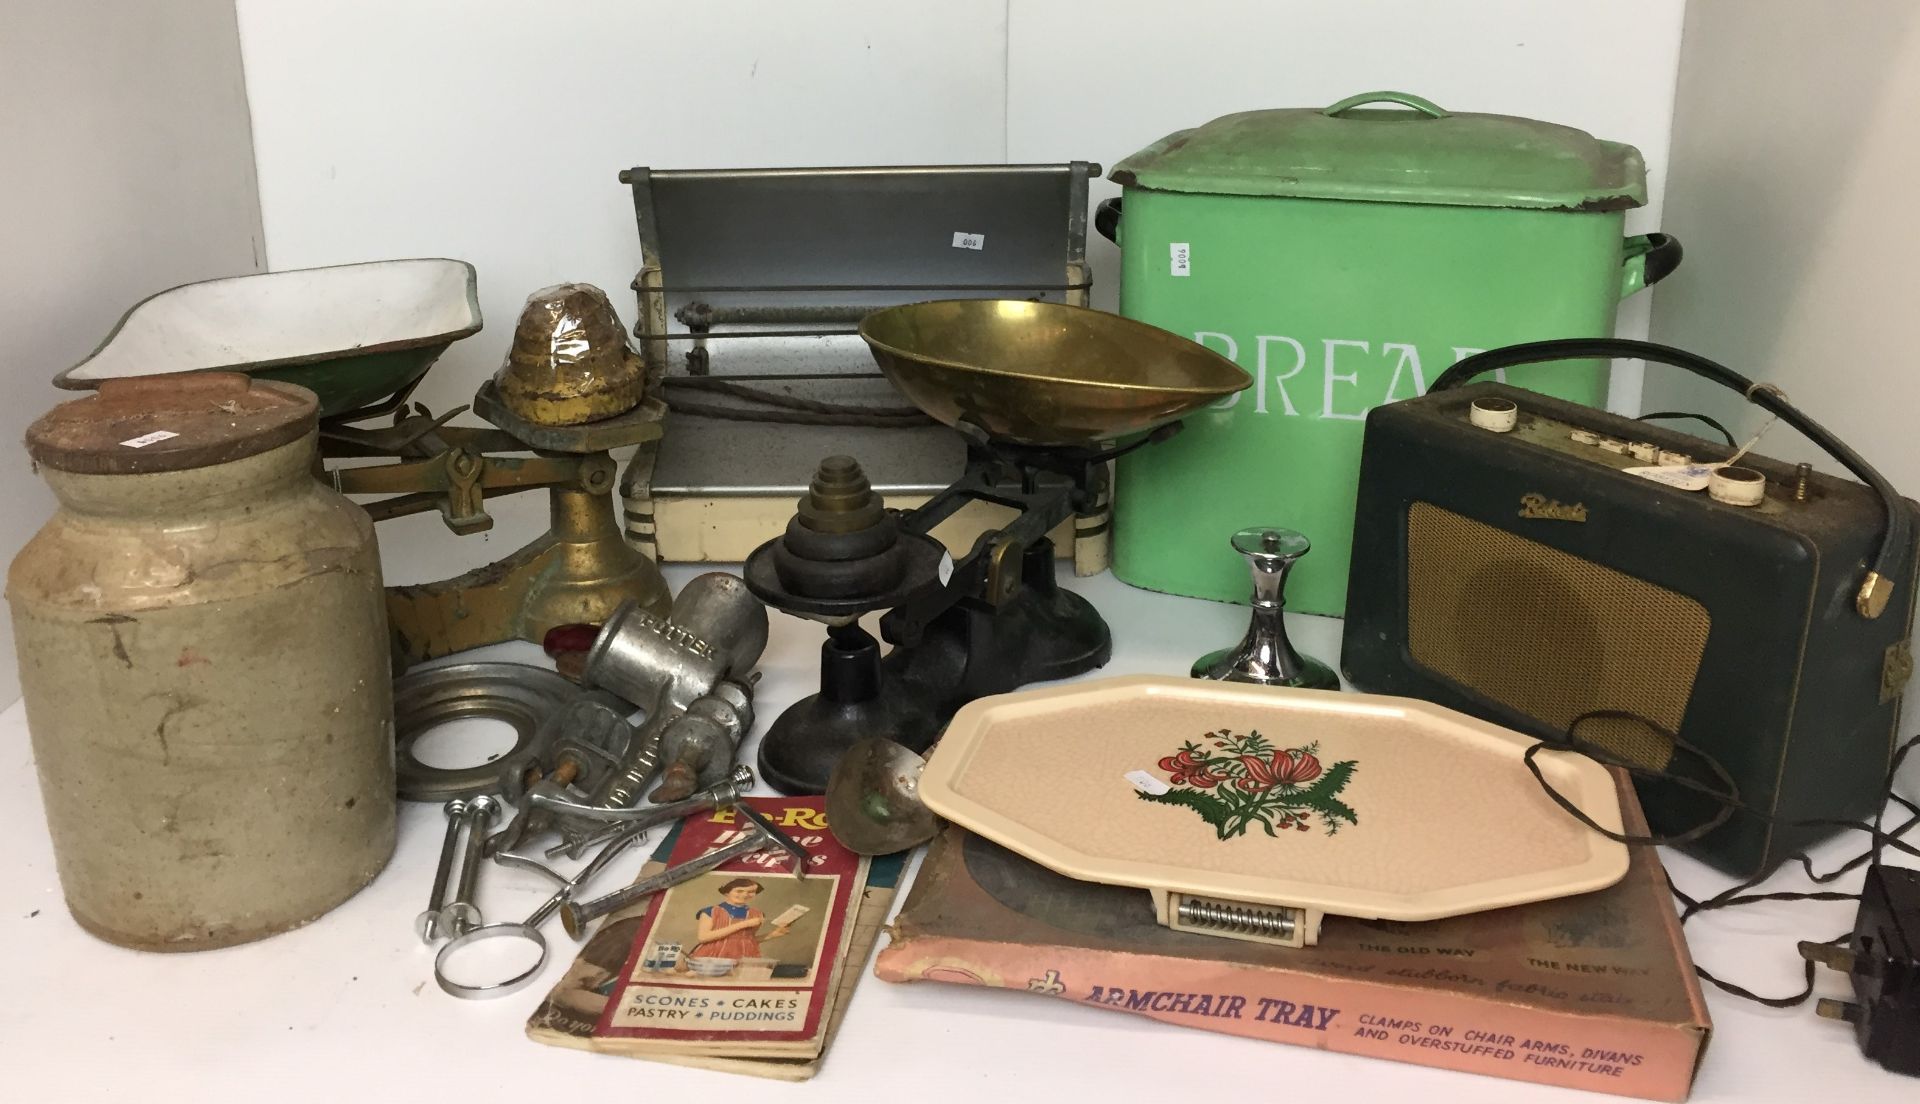 Ten plus vintage items mainly kitchenalia including two weighing scales with pans and sets of